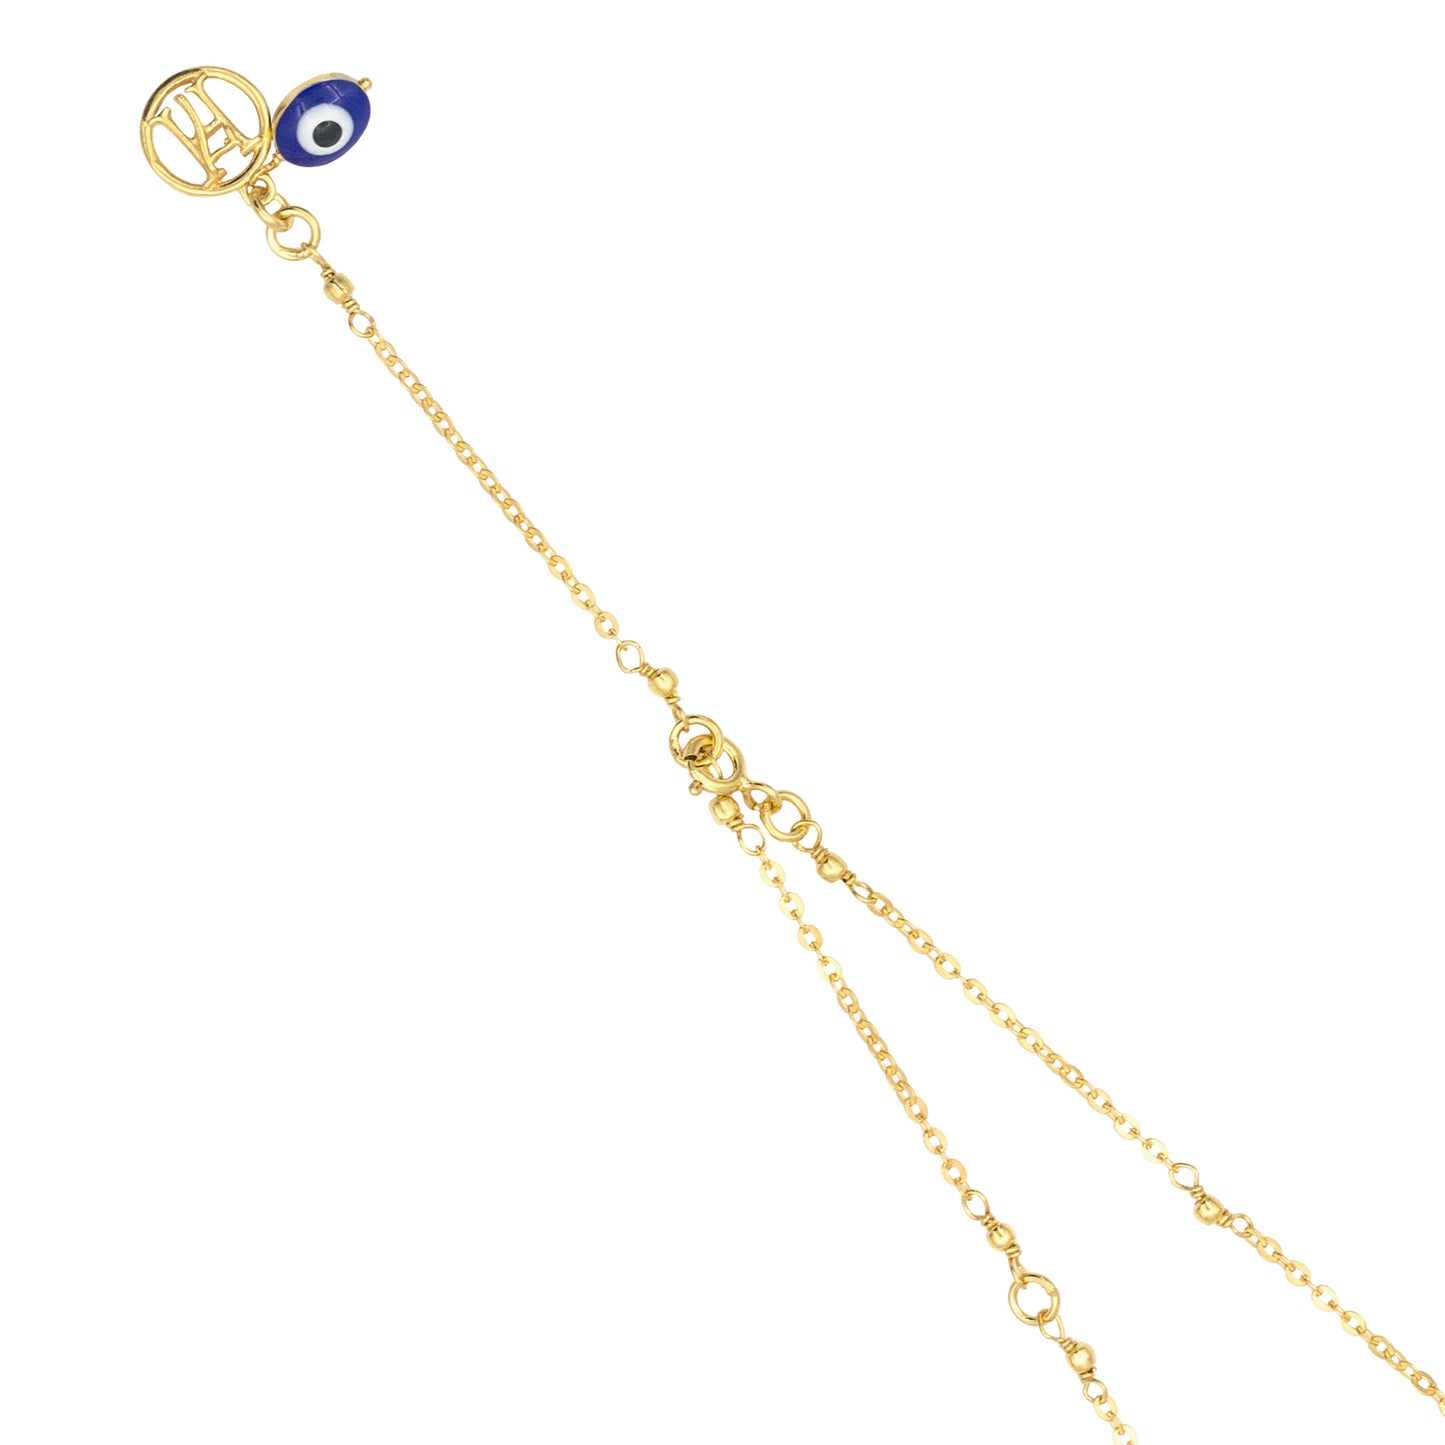 Third Eye Charm Vermeil Necklace for Protection